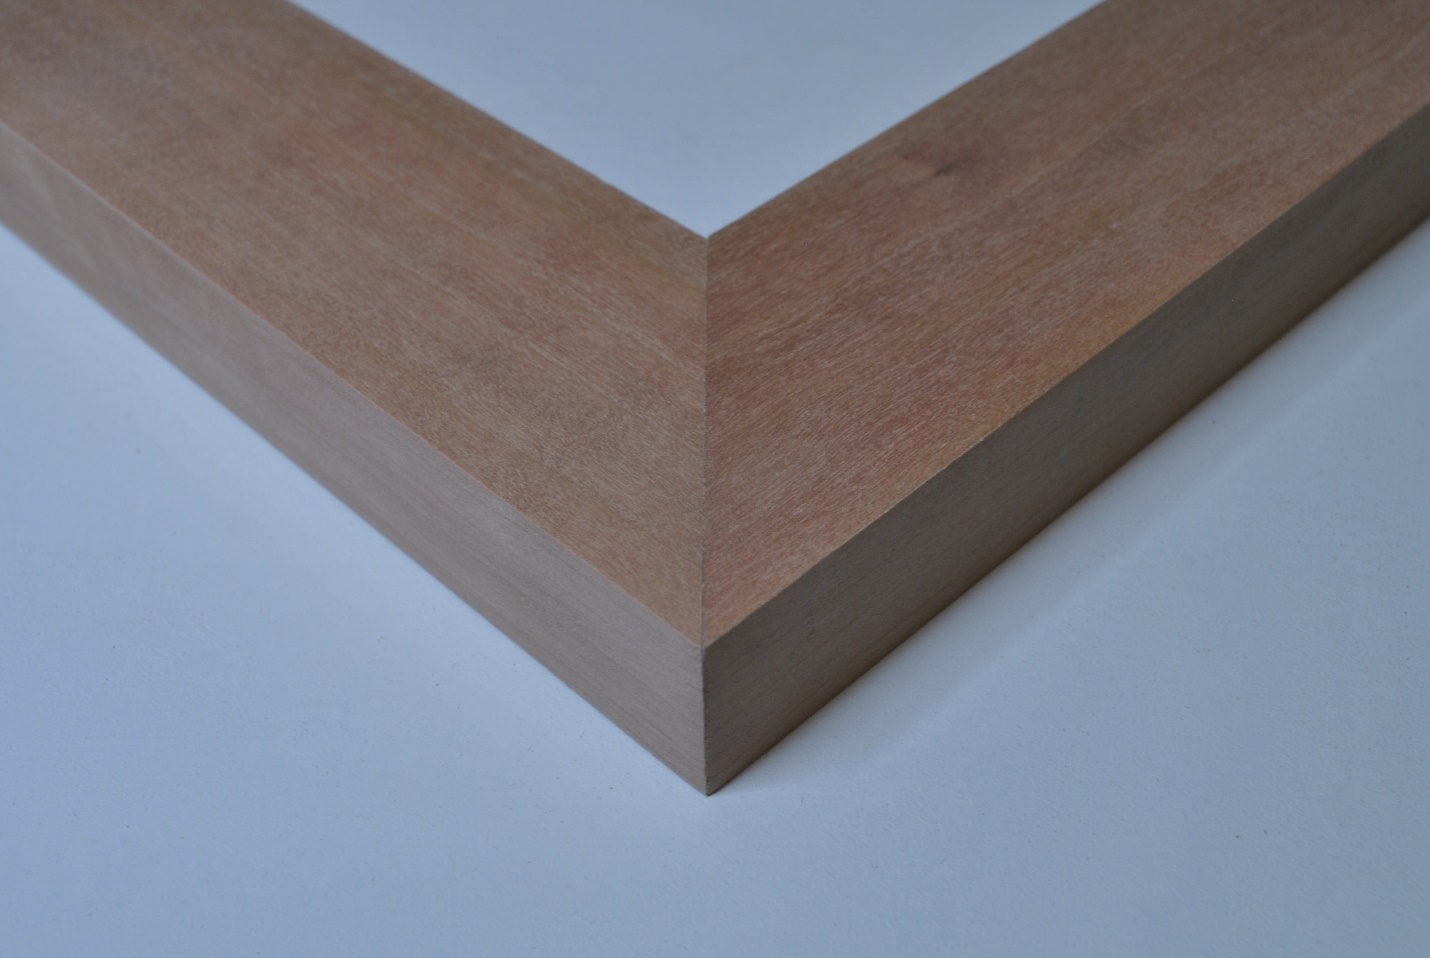 Miter Joint square shape symmetry